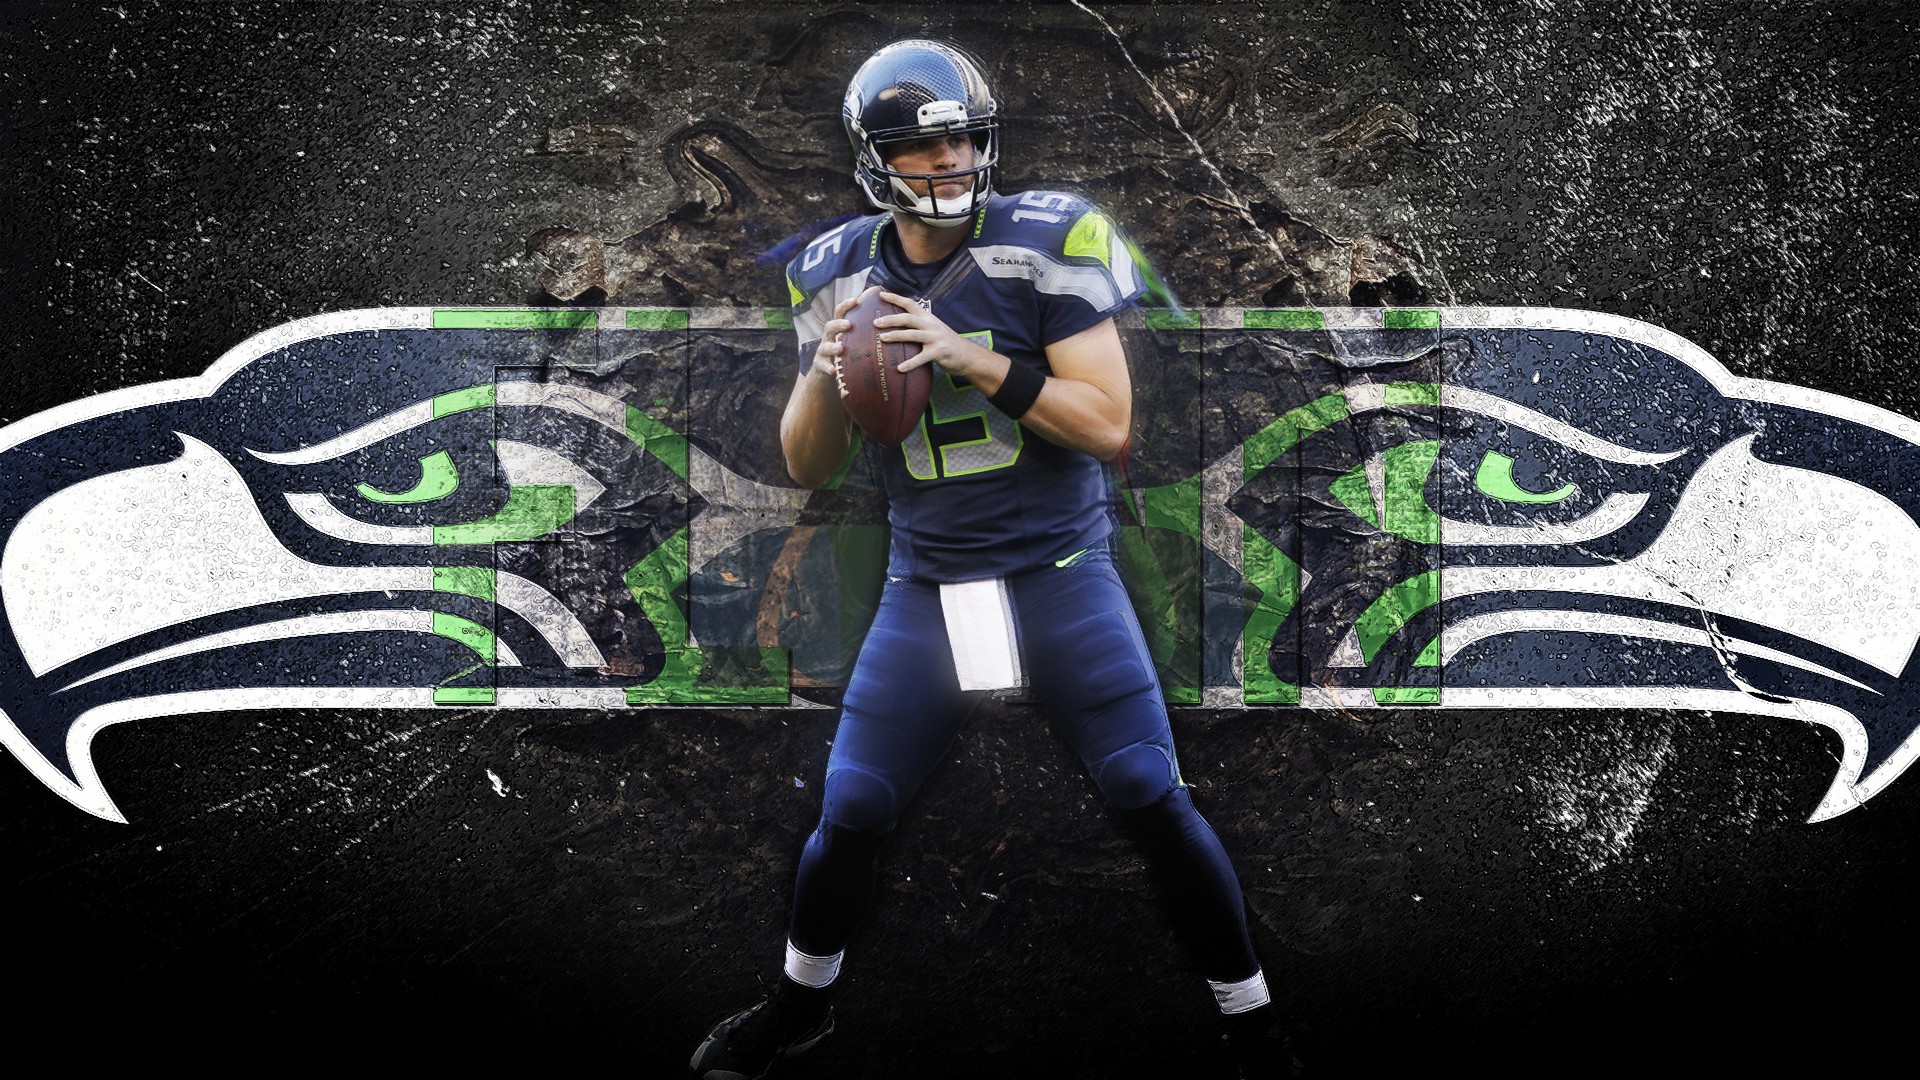 Seattle Seahawks Wallpaper in HD With high-resolution 1920X1080 pixel. Download and set as wallpaper for Desktop Computer, Apple iPhone X, XS Max, XR, 8, 7, 6, SE, iPad, Android